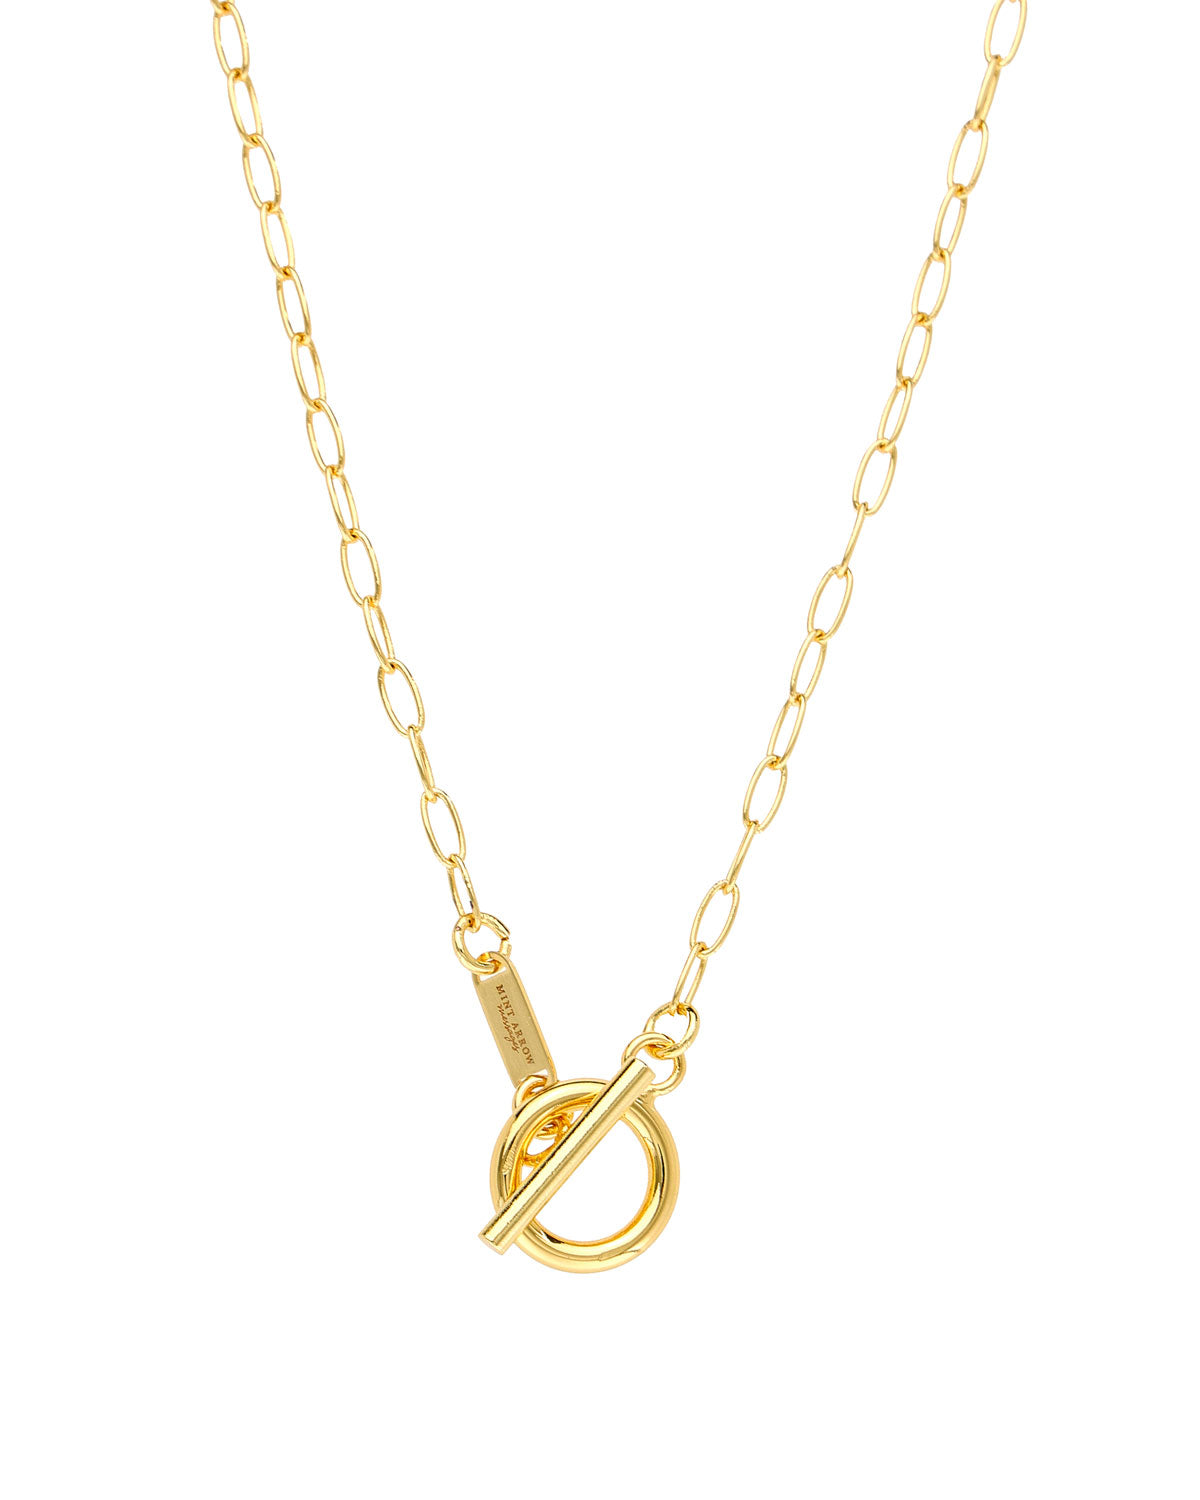 One Day Gold Necklace